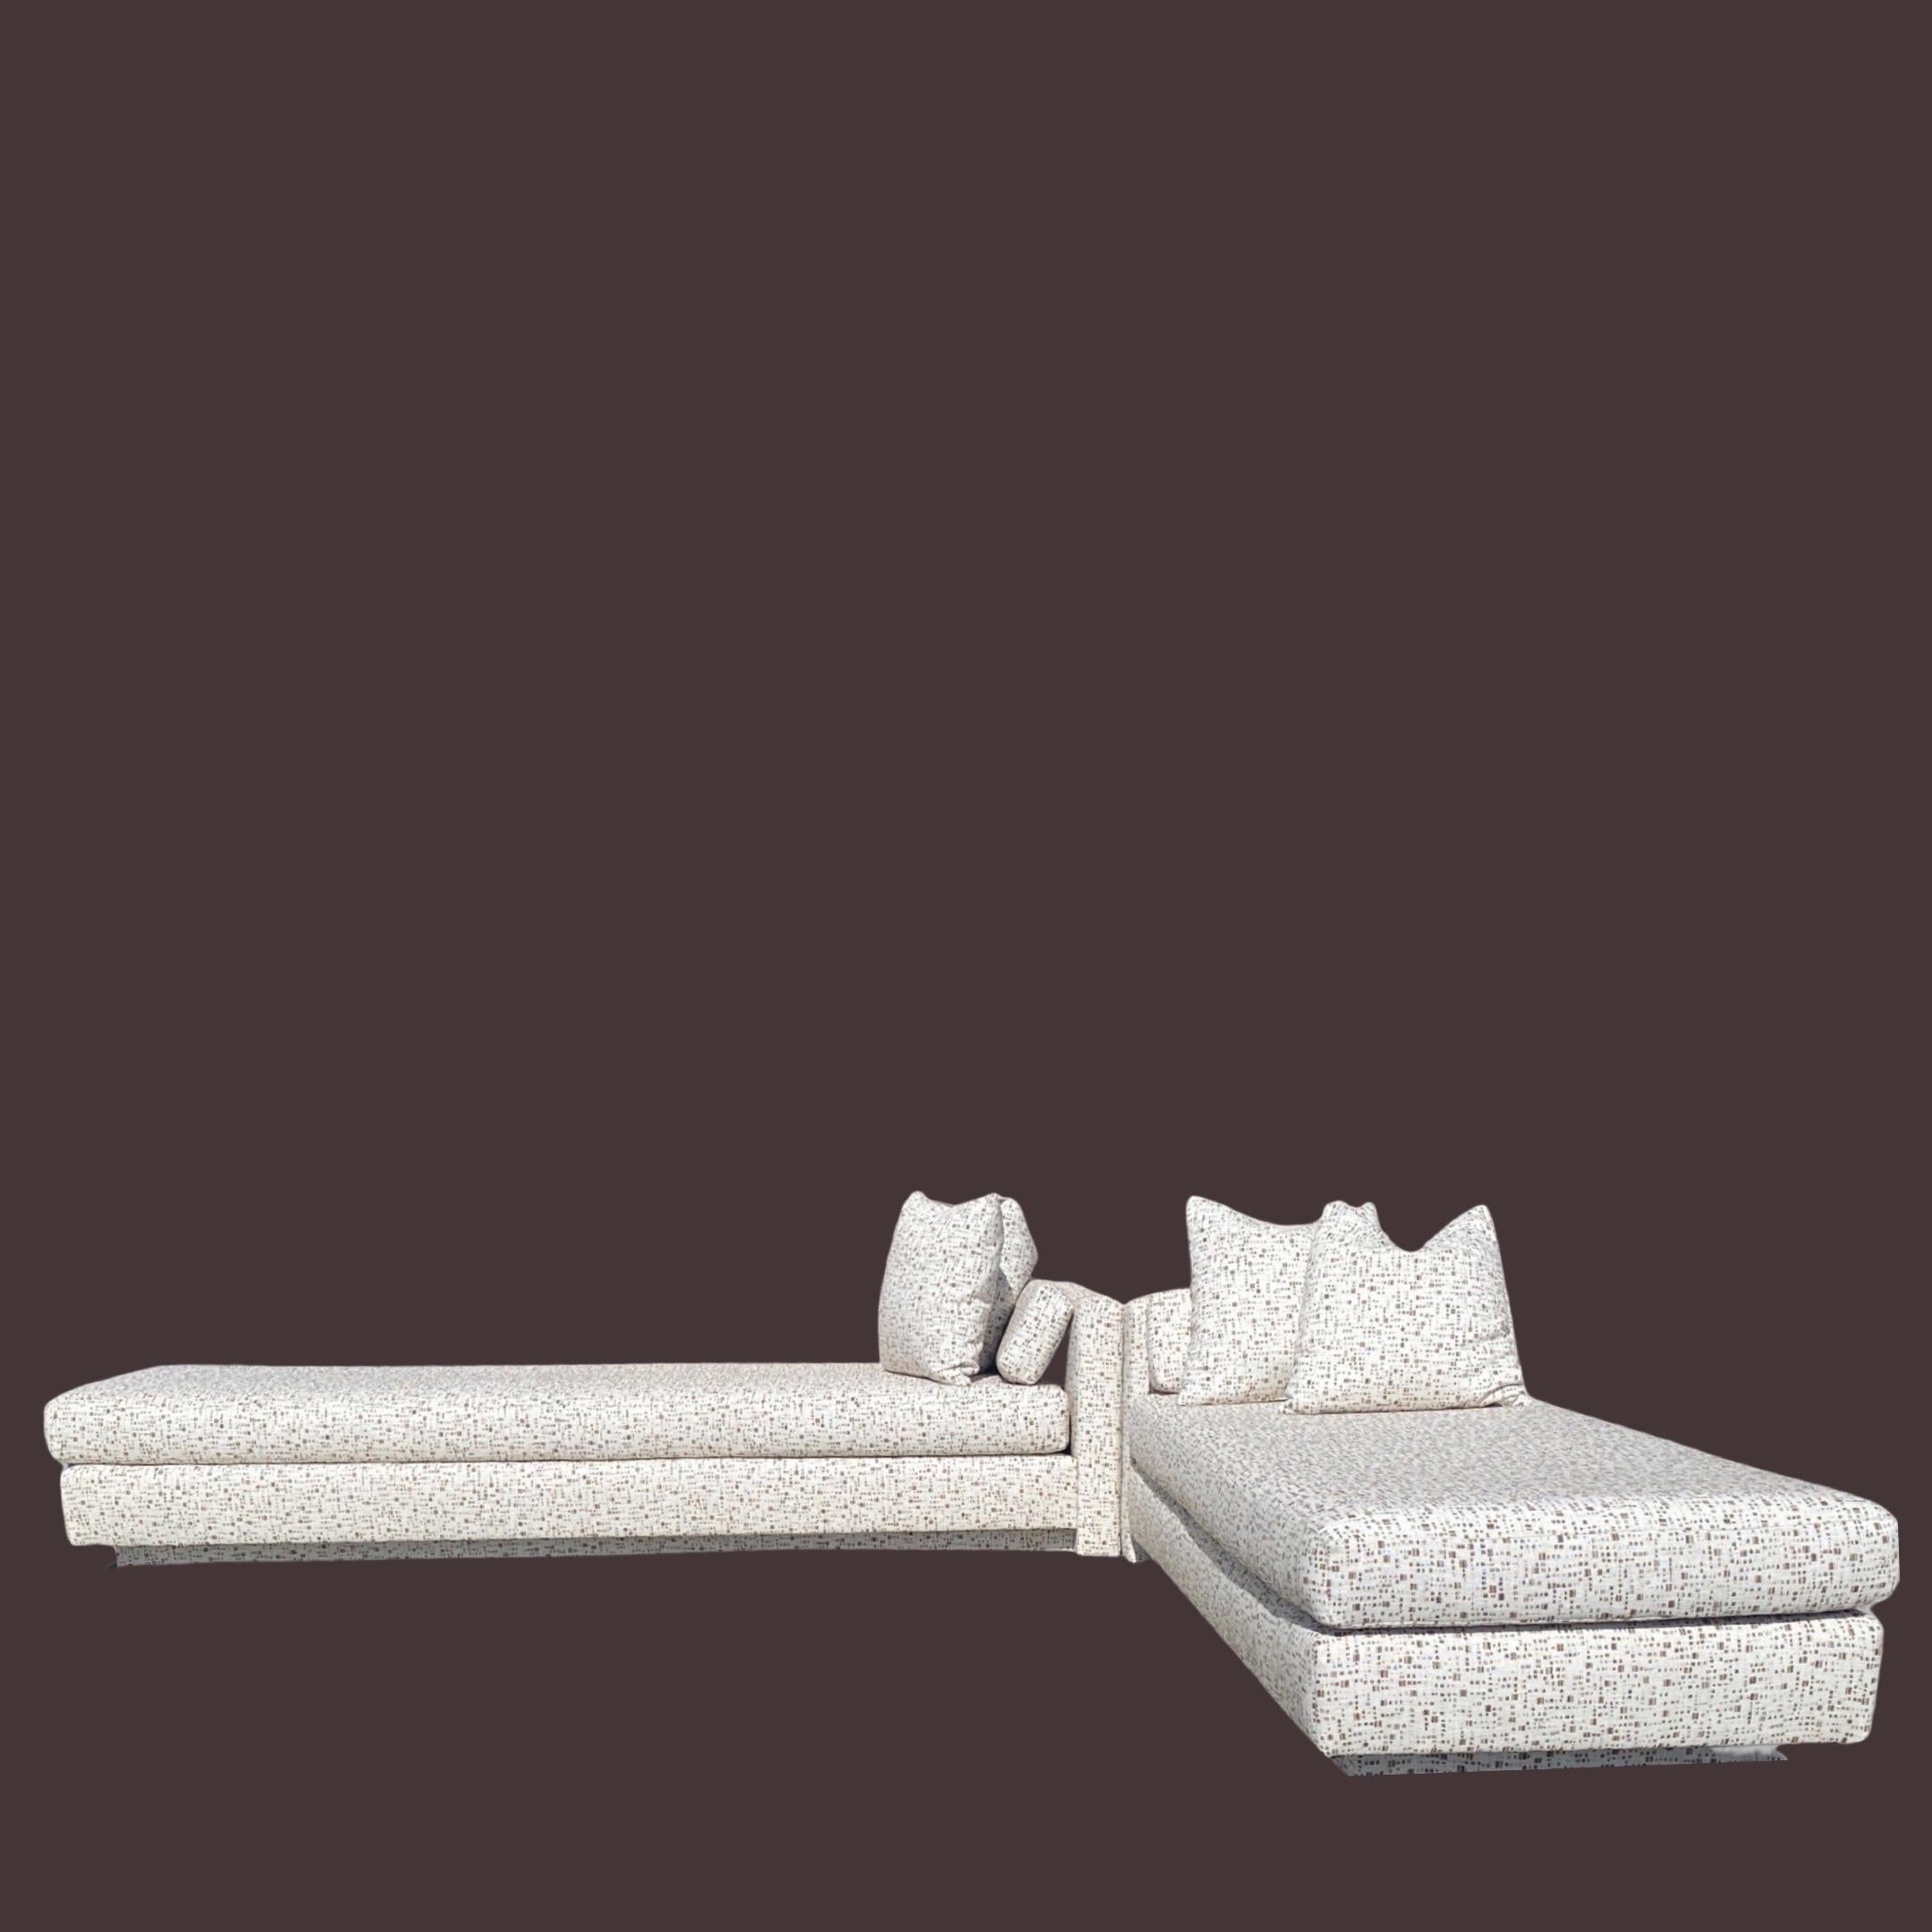 Sofa and Chaise Set in Modern Geometric Neutral Fabric in Style of Steve Chase For Sale 1